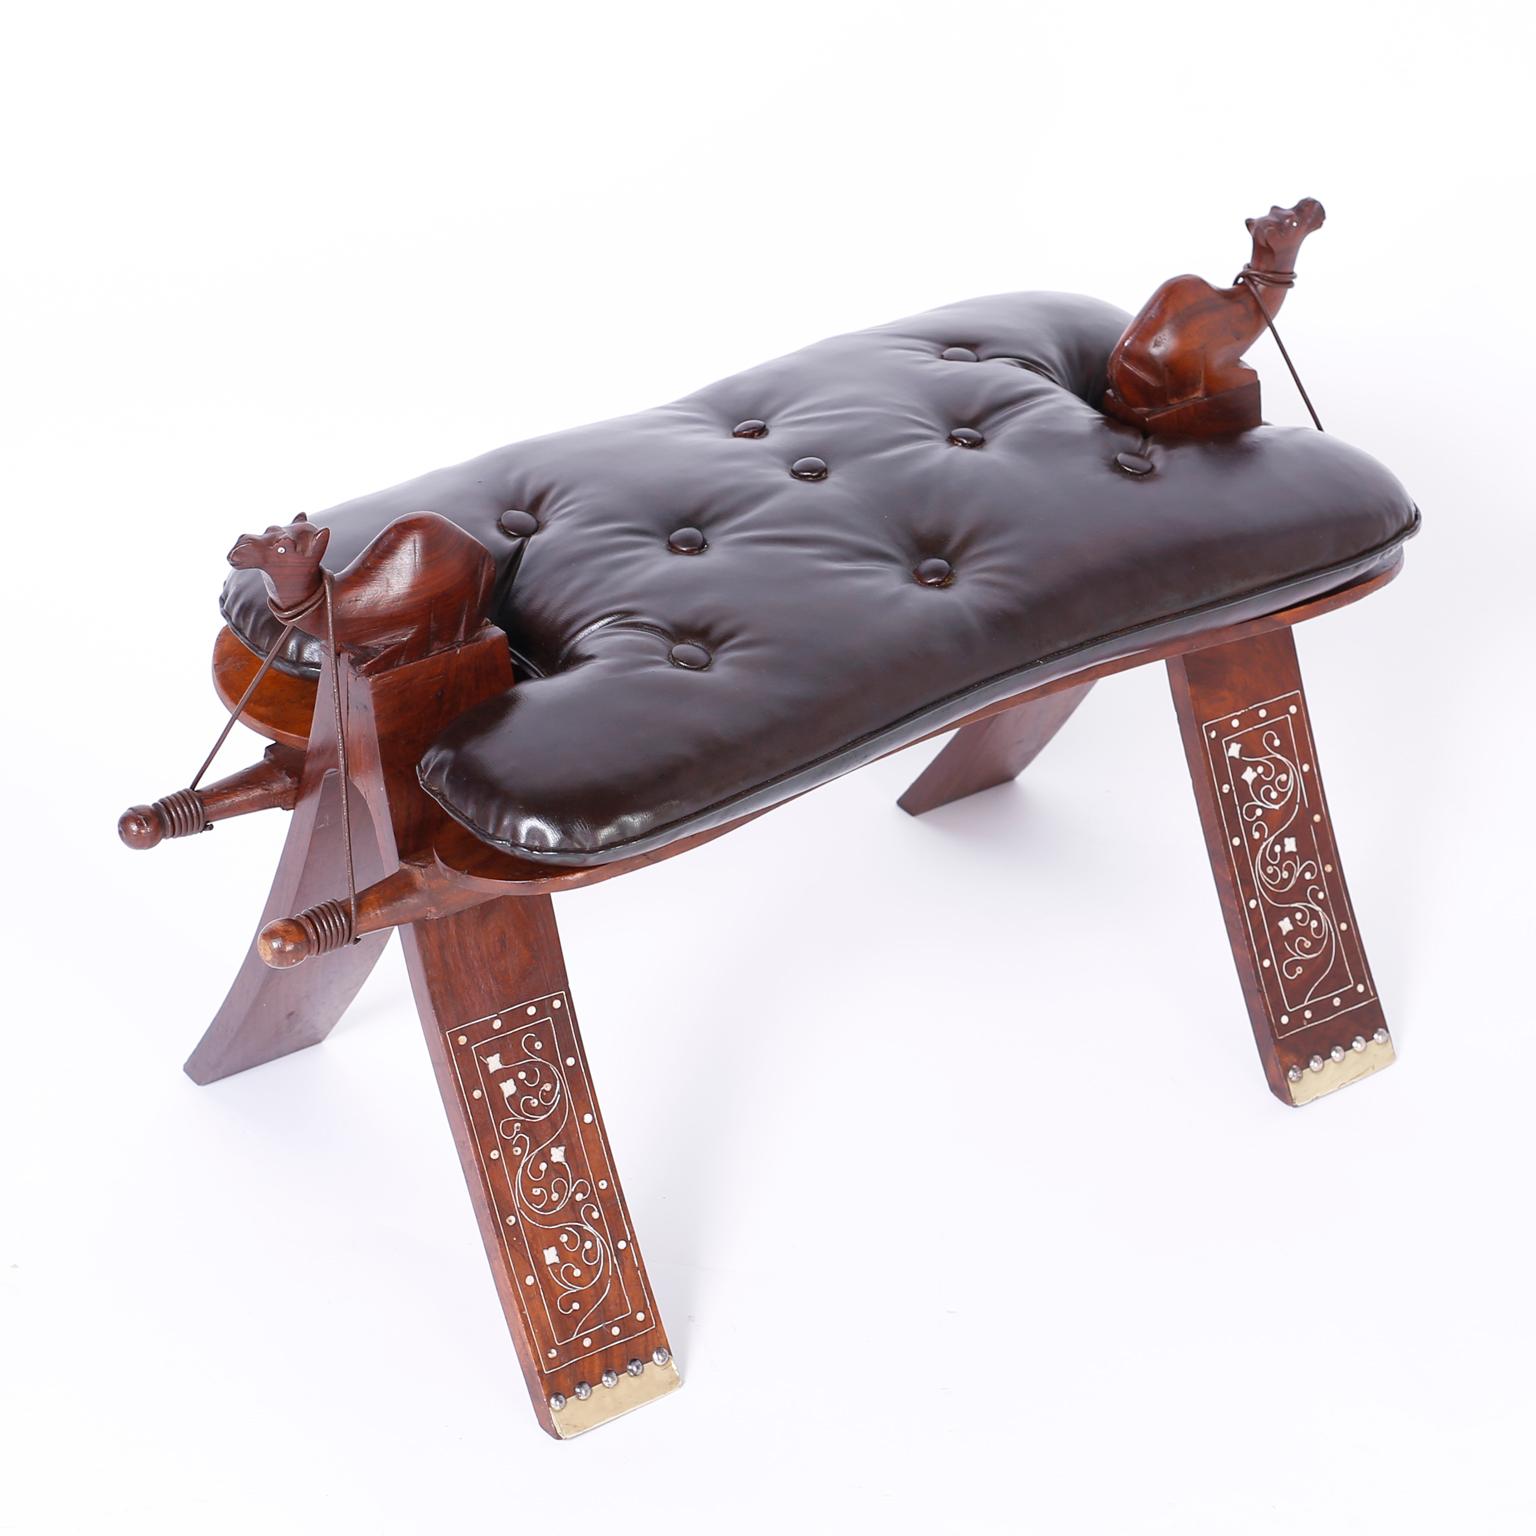 Camel saddle foot stool crafted in mahogany with two carved camels at the top, dark chocolate brown leather button tufted cushion, and splayed legs decorated with floral brass inlays.